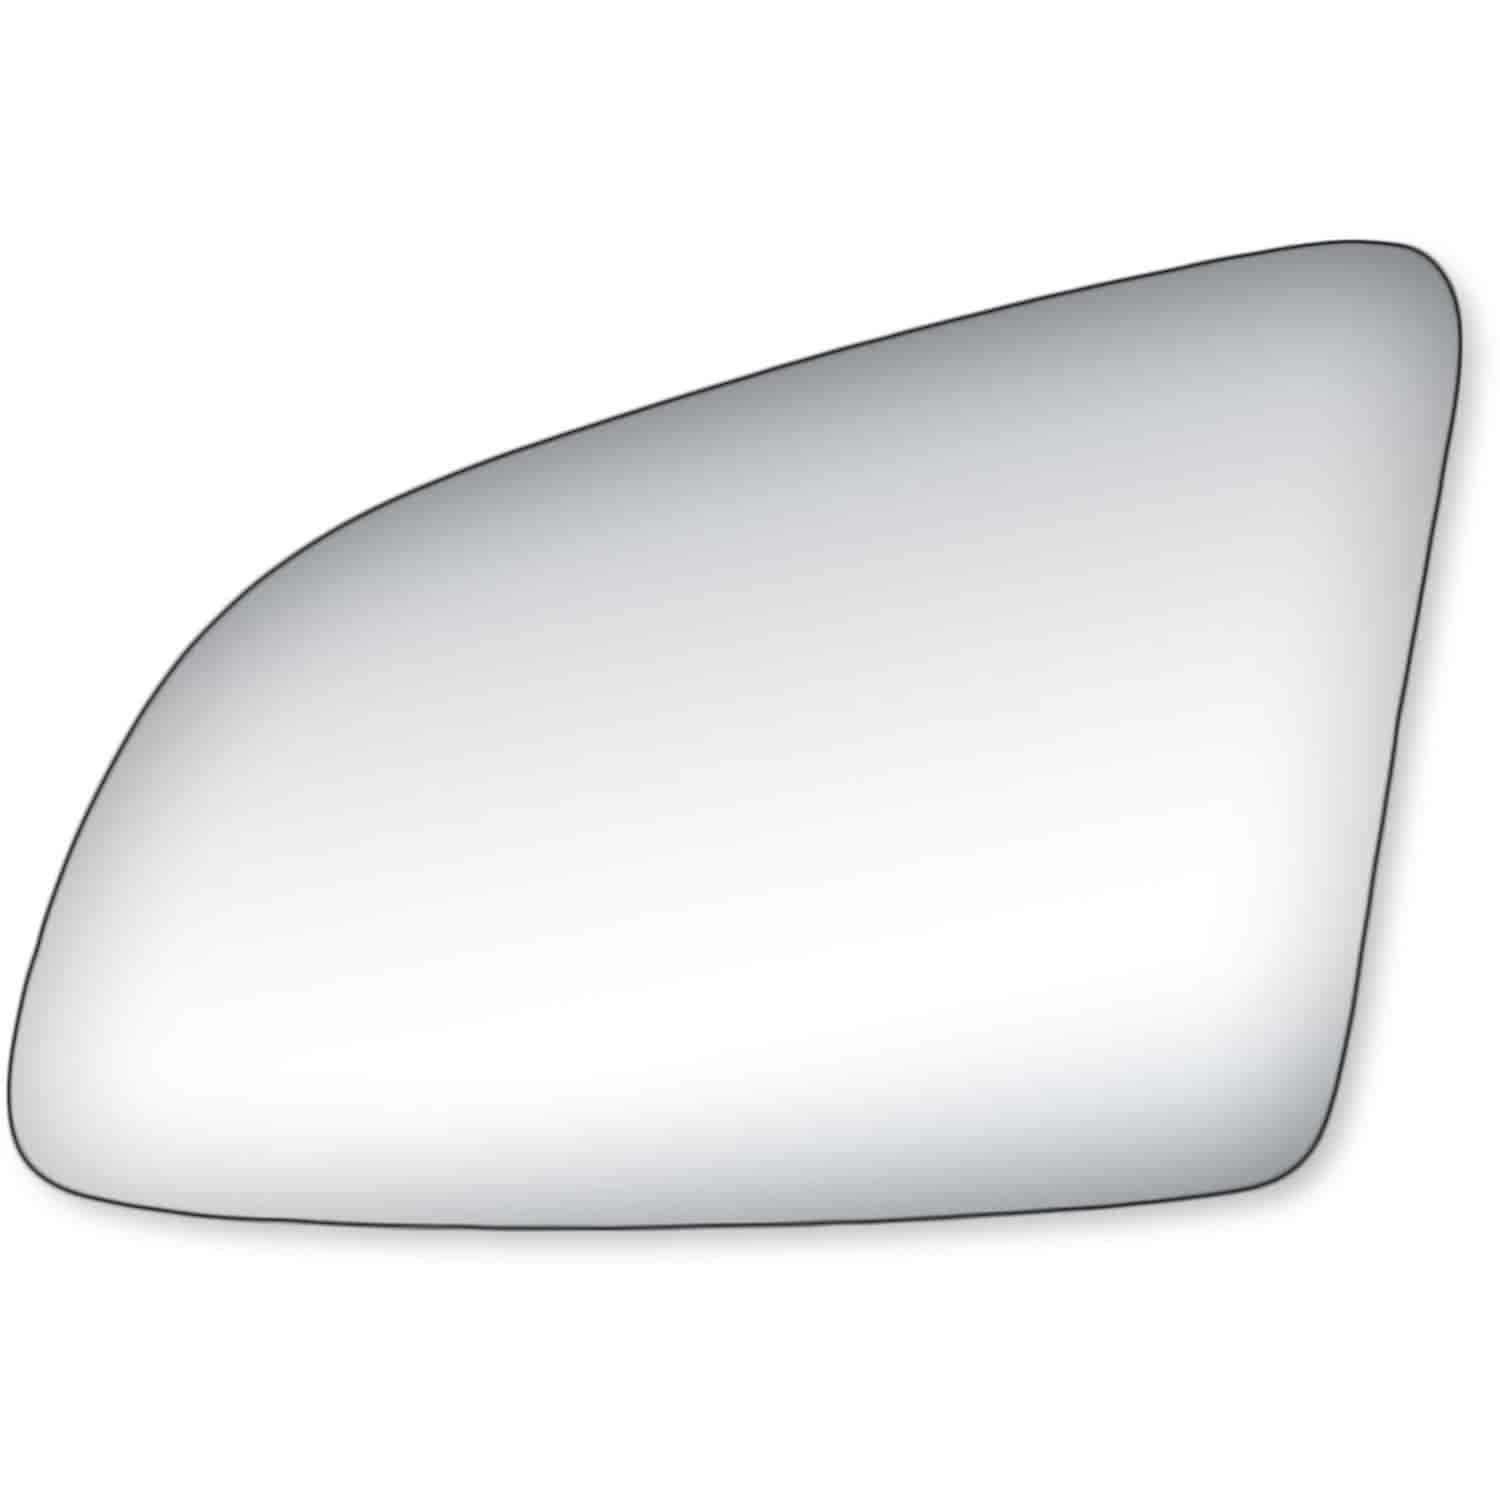 Replacement Glass for 88-94 Tempo 4 Door ; 88-94 Topaz 4 door the glass measures 3 3/8 tall by 5 3/8